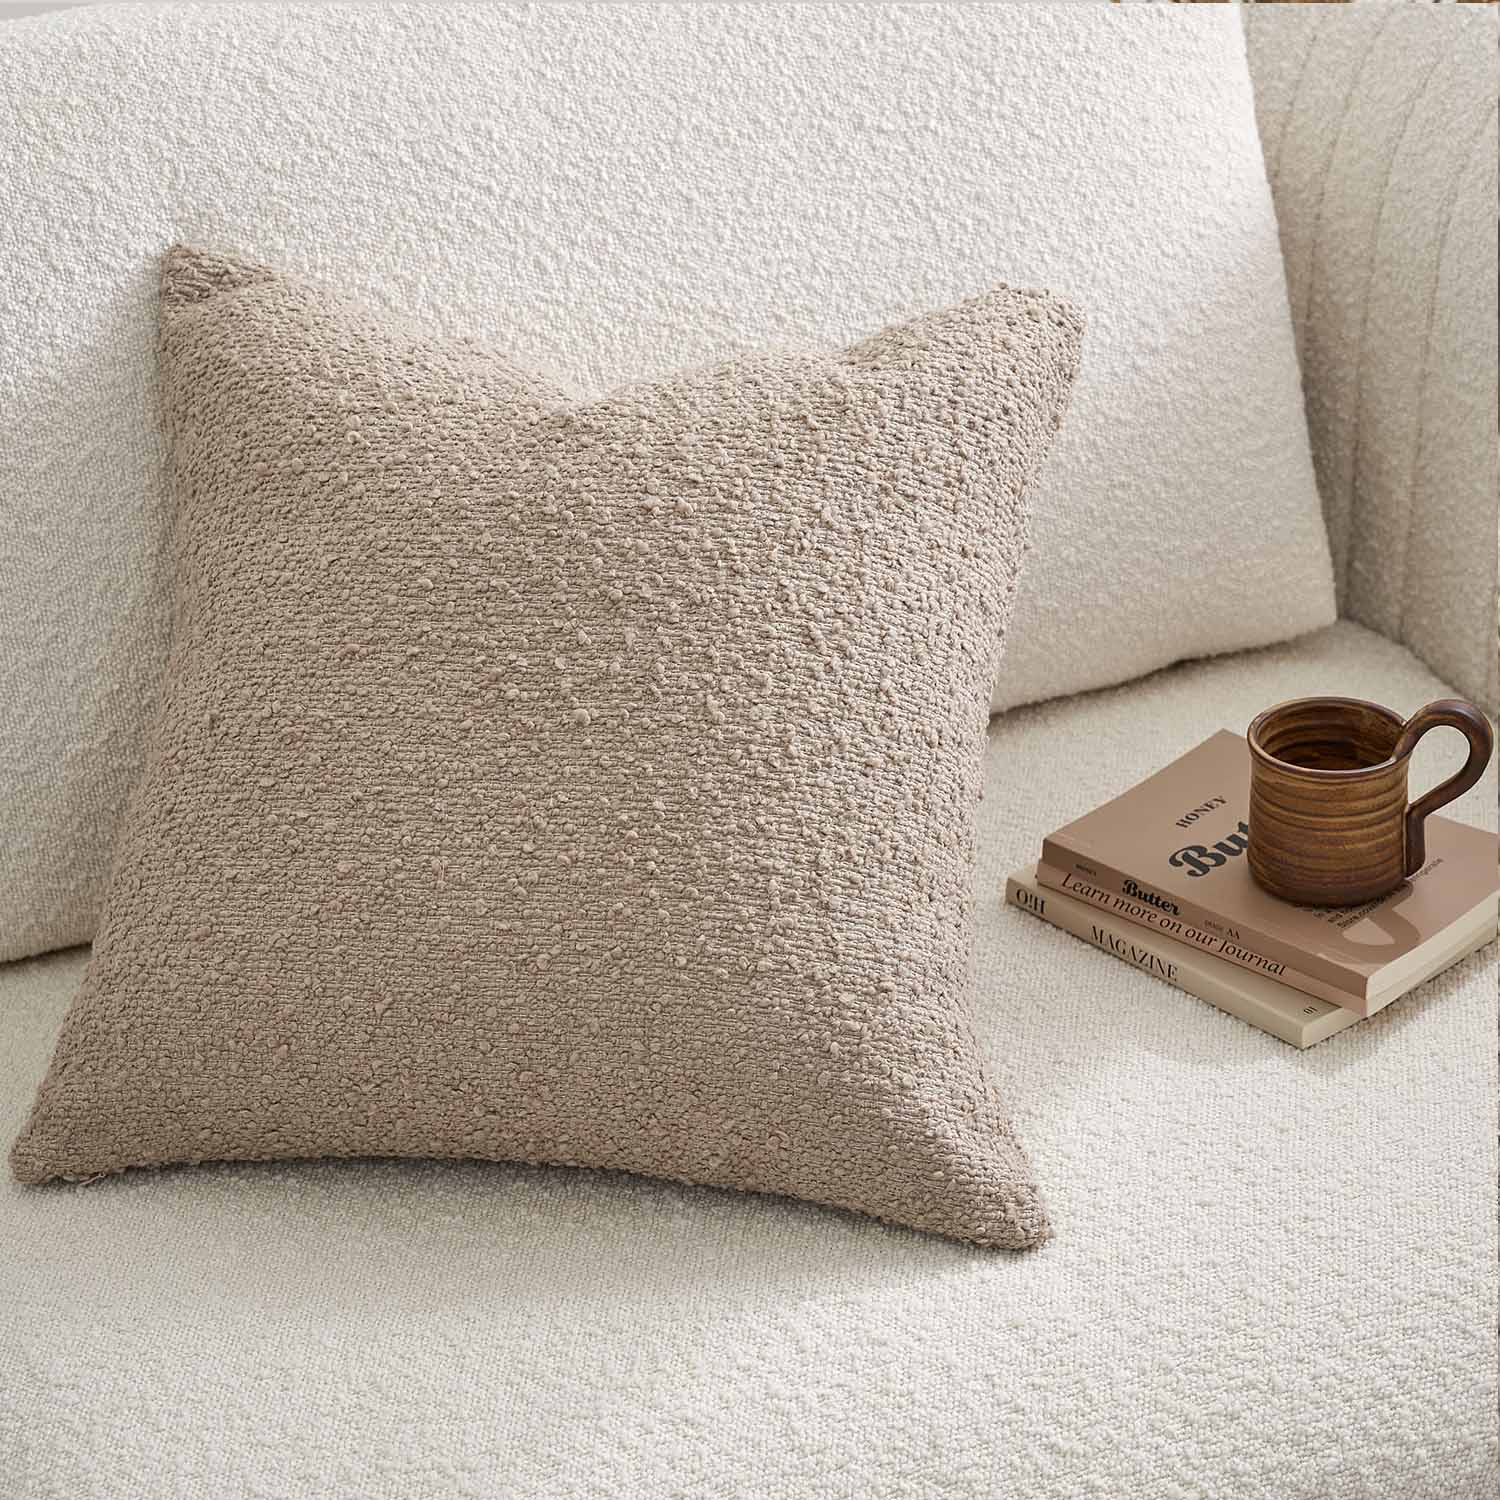 Castello Textured Boucle Pillow Cover-